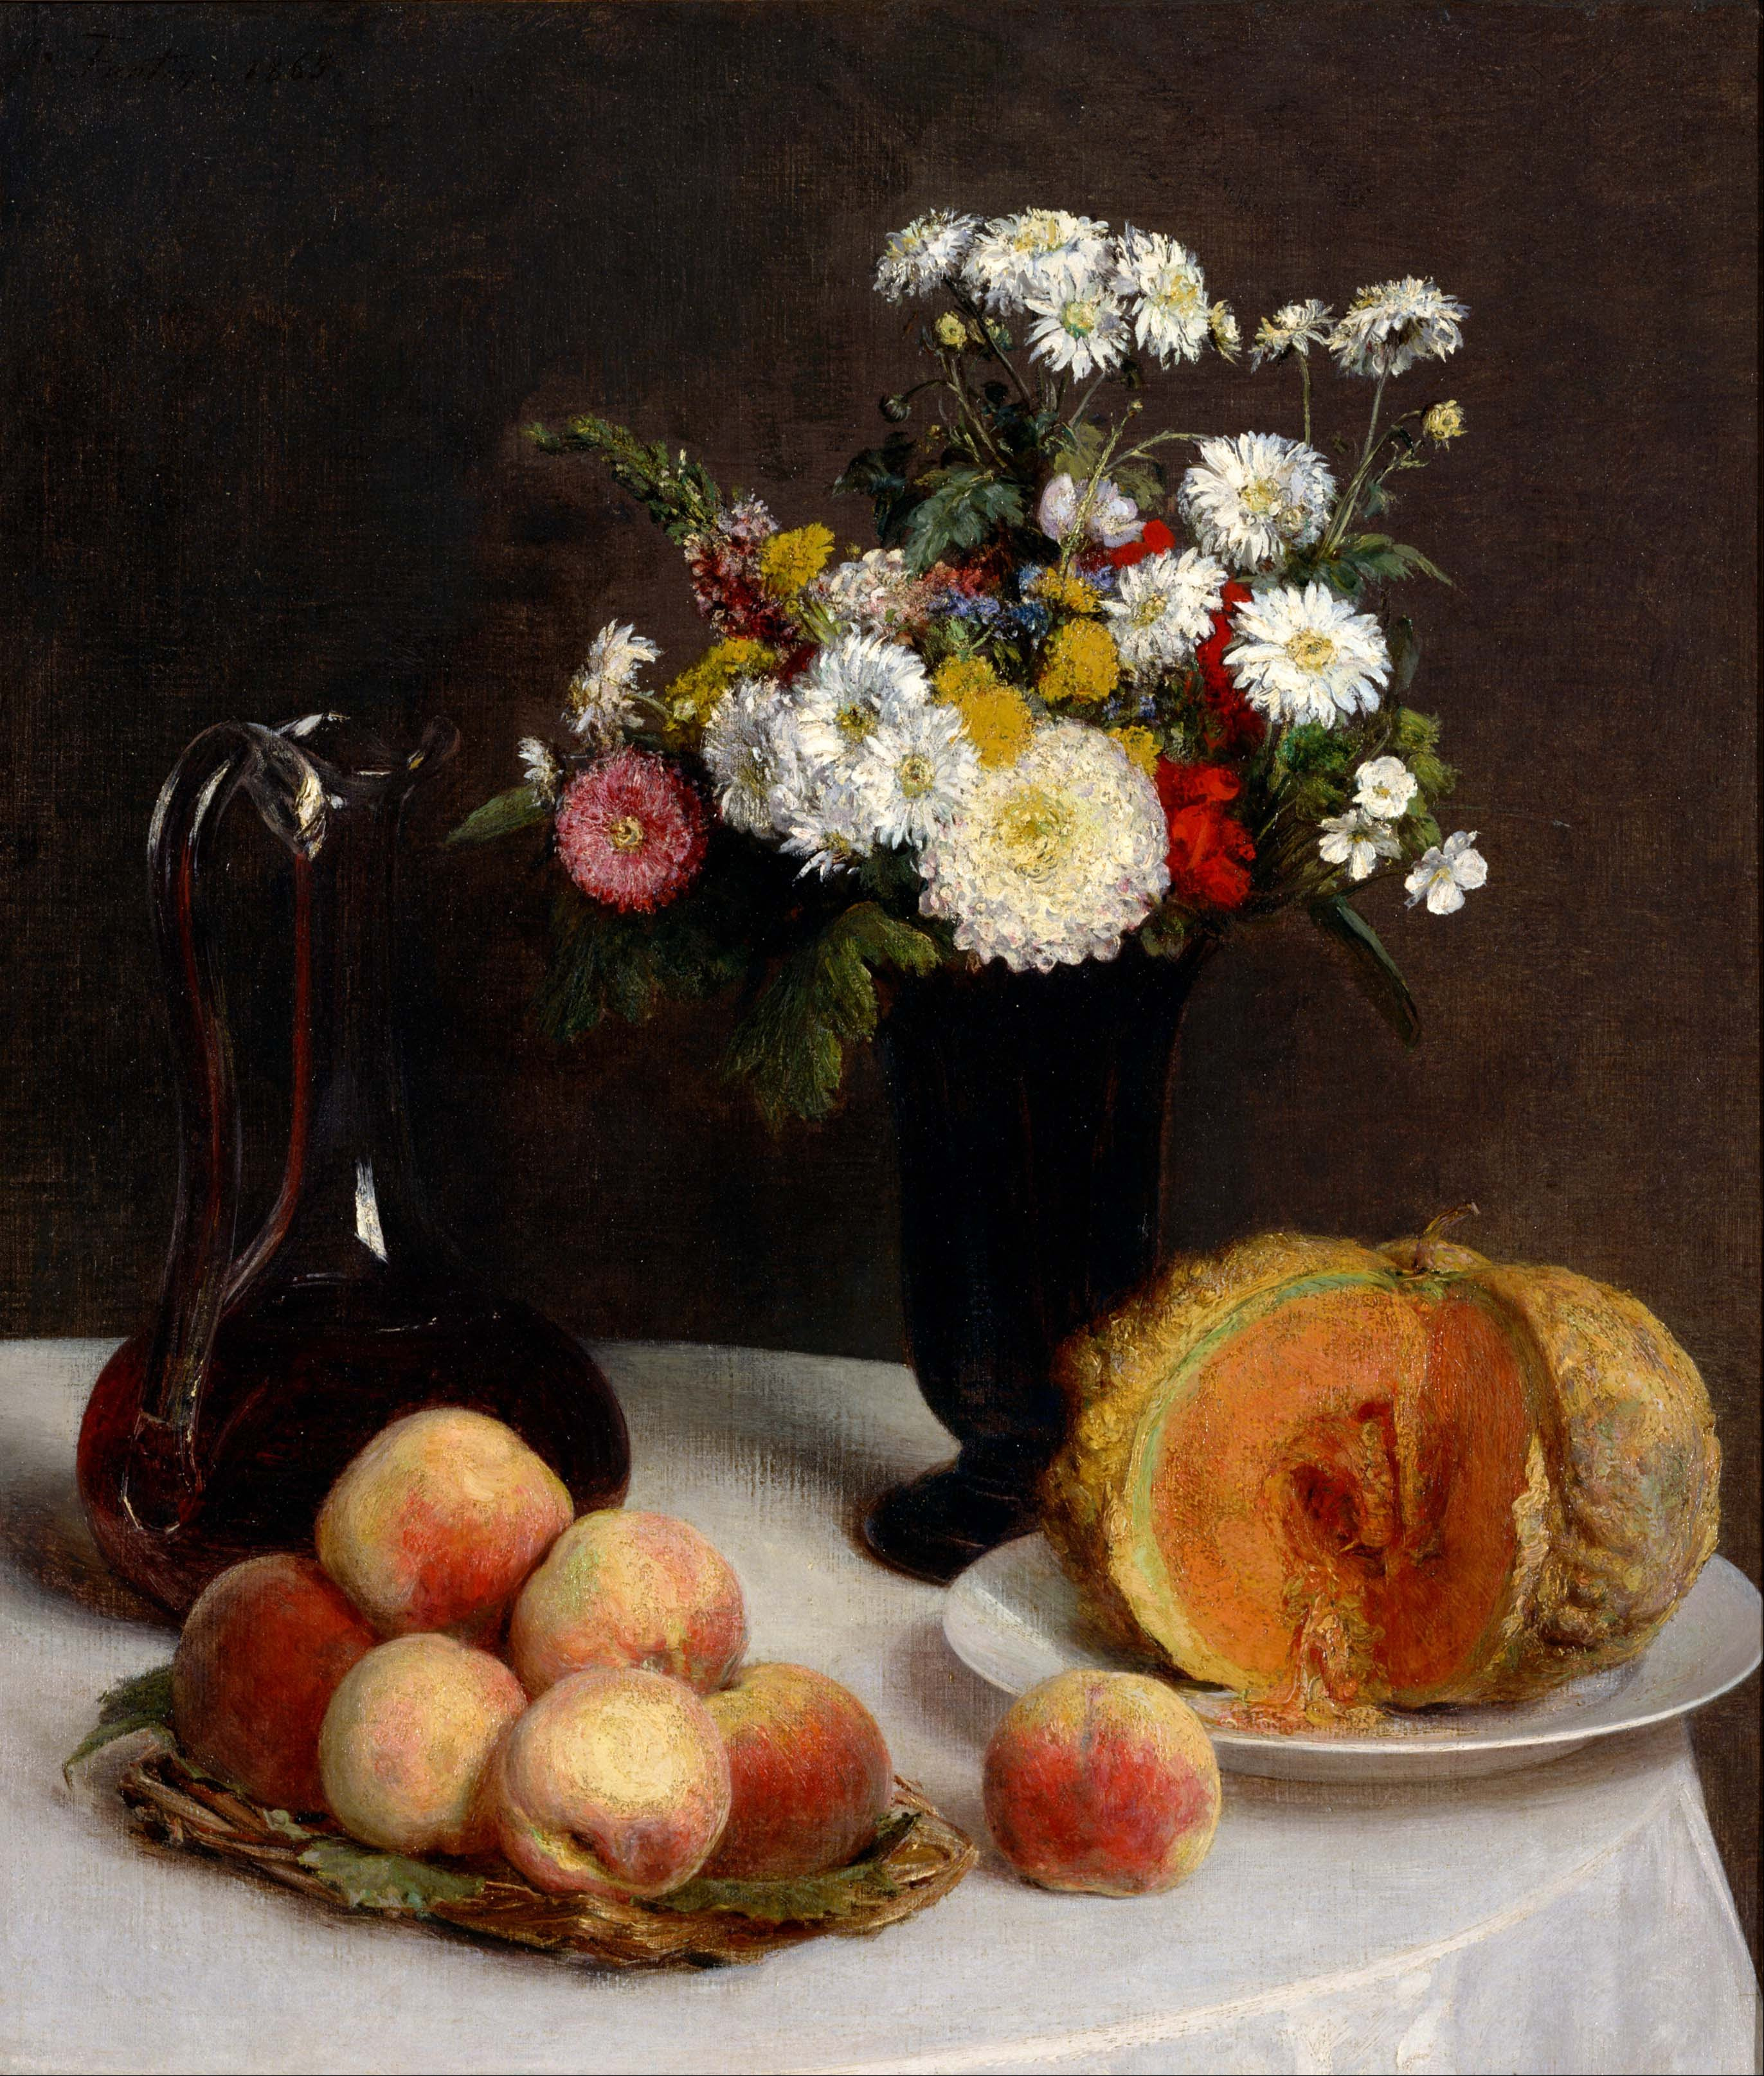 0548_Henri Fantin-Latour_Still Life with a Carafe, Flowers and Fruit 썸네일